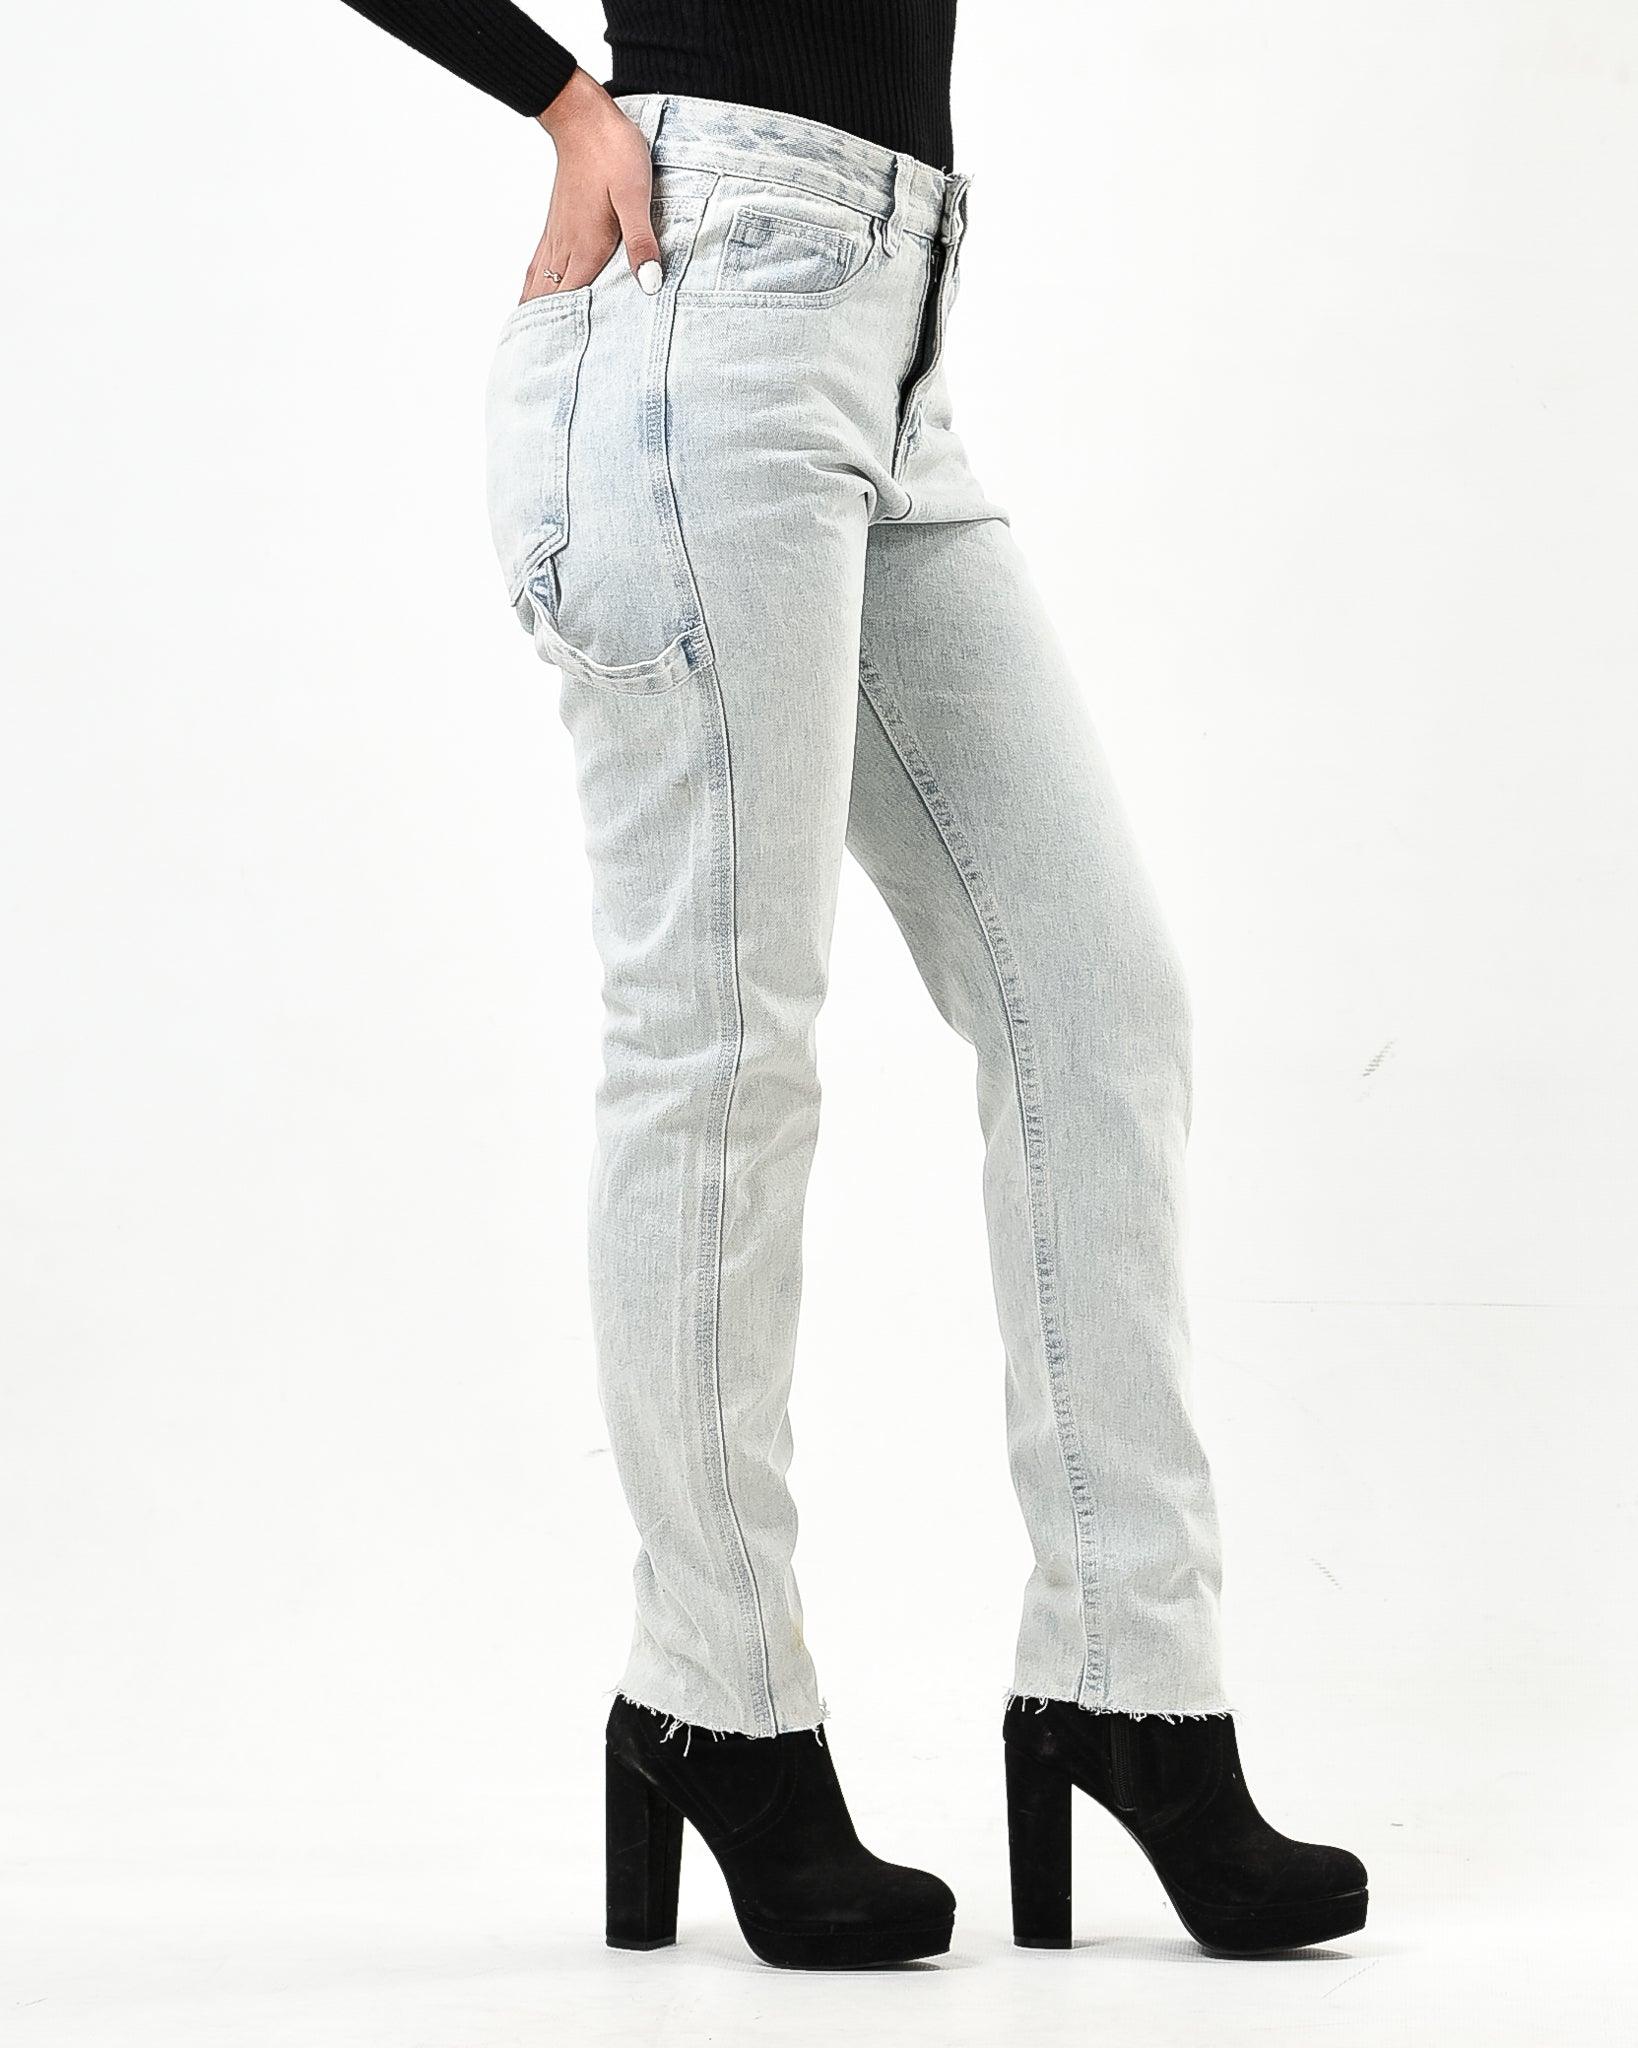 Jeans with side pocket - XD21